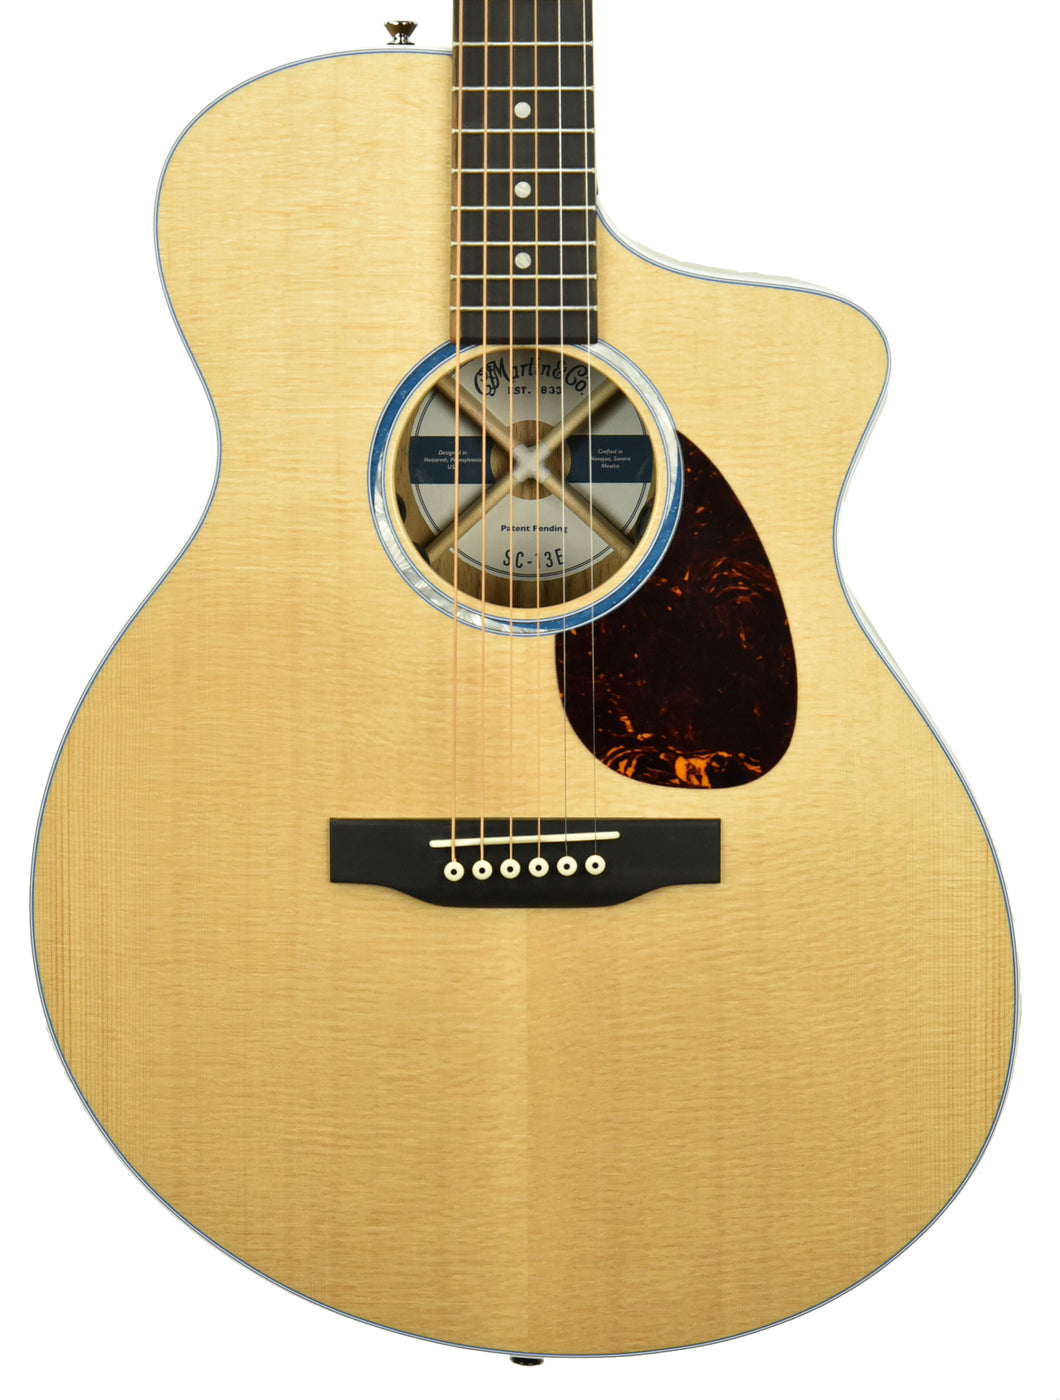 Martin SC-13e Acoustic Electric Guitar in Natural w/Gig Bag 243227 - The Music Gallery